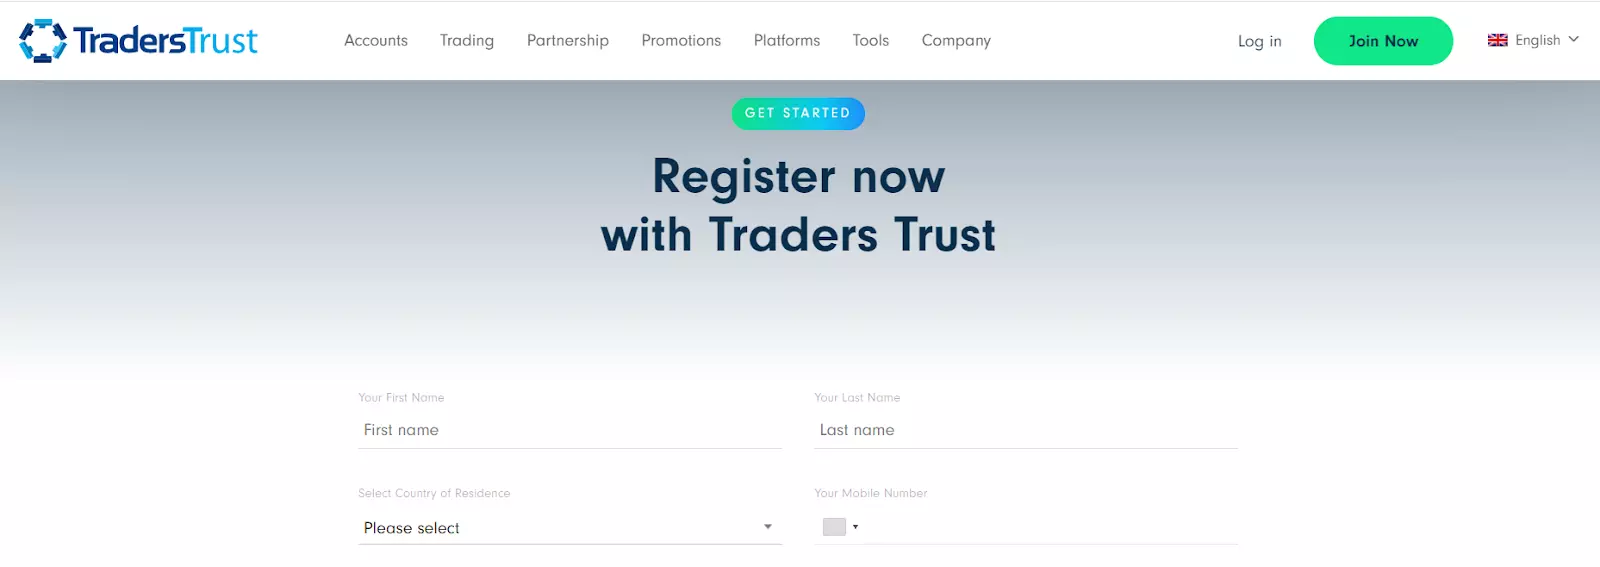 Traders Trust Review – Registration